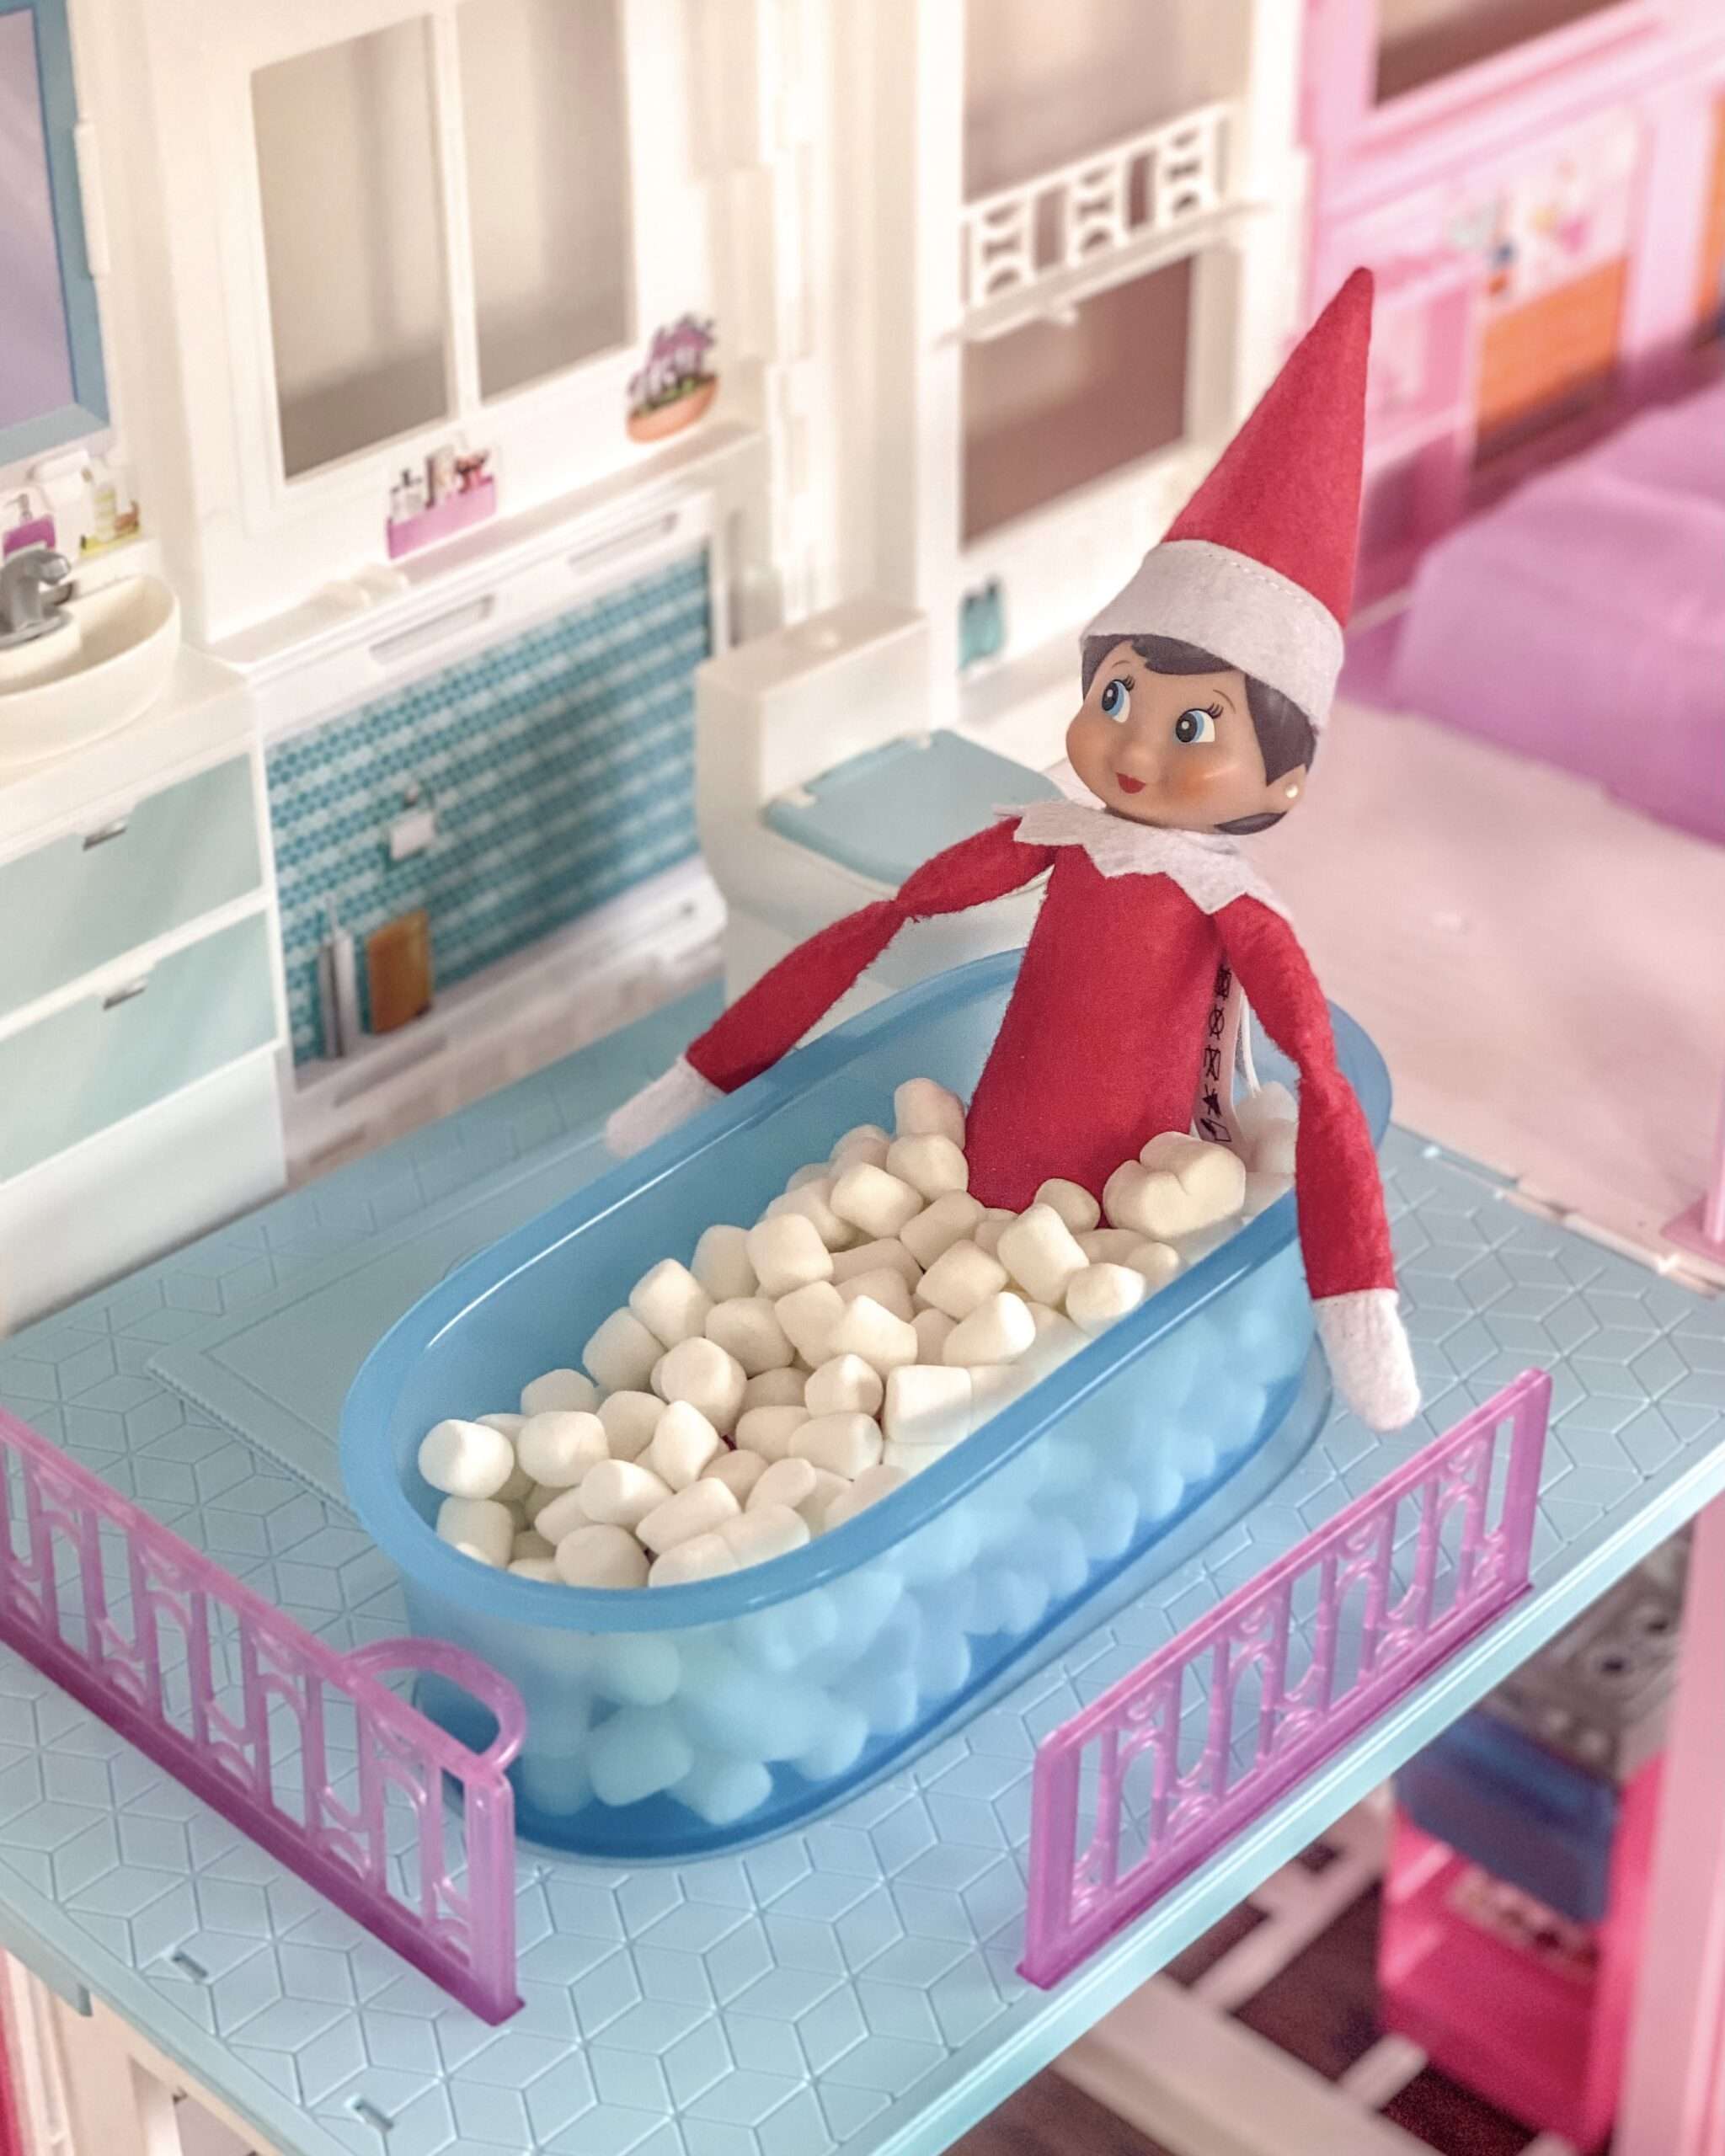 Mini Marshmallow bubble bath. Fun & easy Elf on the Shelf ideas for your toddler or little kid. Elf swinging on a roll of toilet paper. Quick to setup and lots of naughty and nice ideas, perfect to bring some Christmas magic to your home. #ElfOnTheShelf #ElfIdeas #ElfOnTheShelfIdeas #Christmas #ChristmasMagic